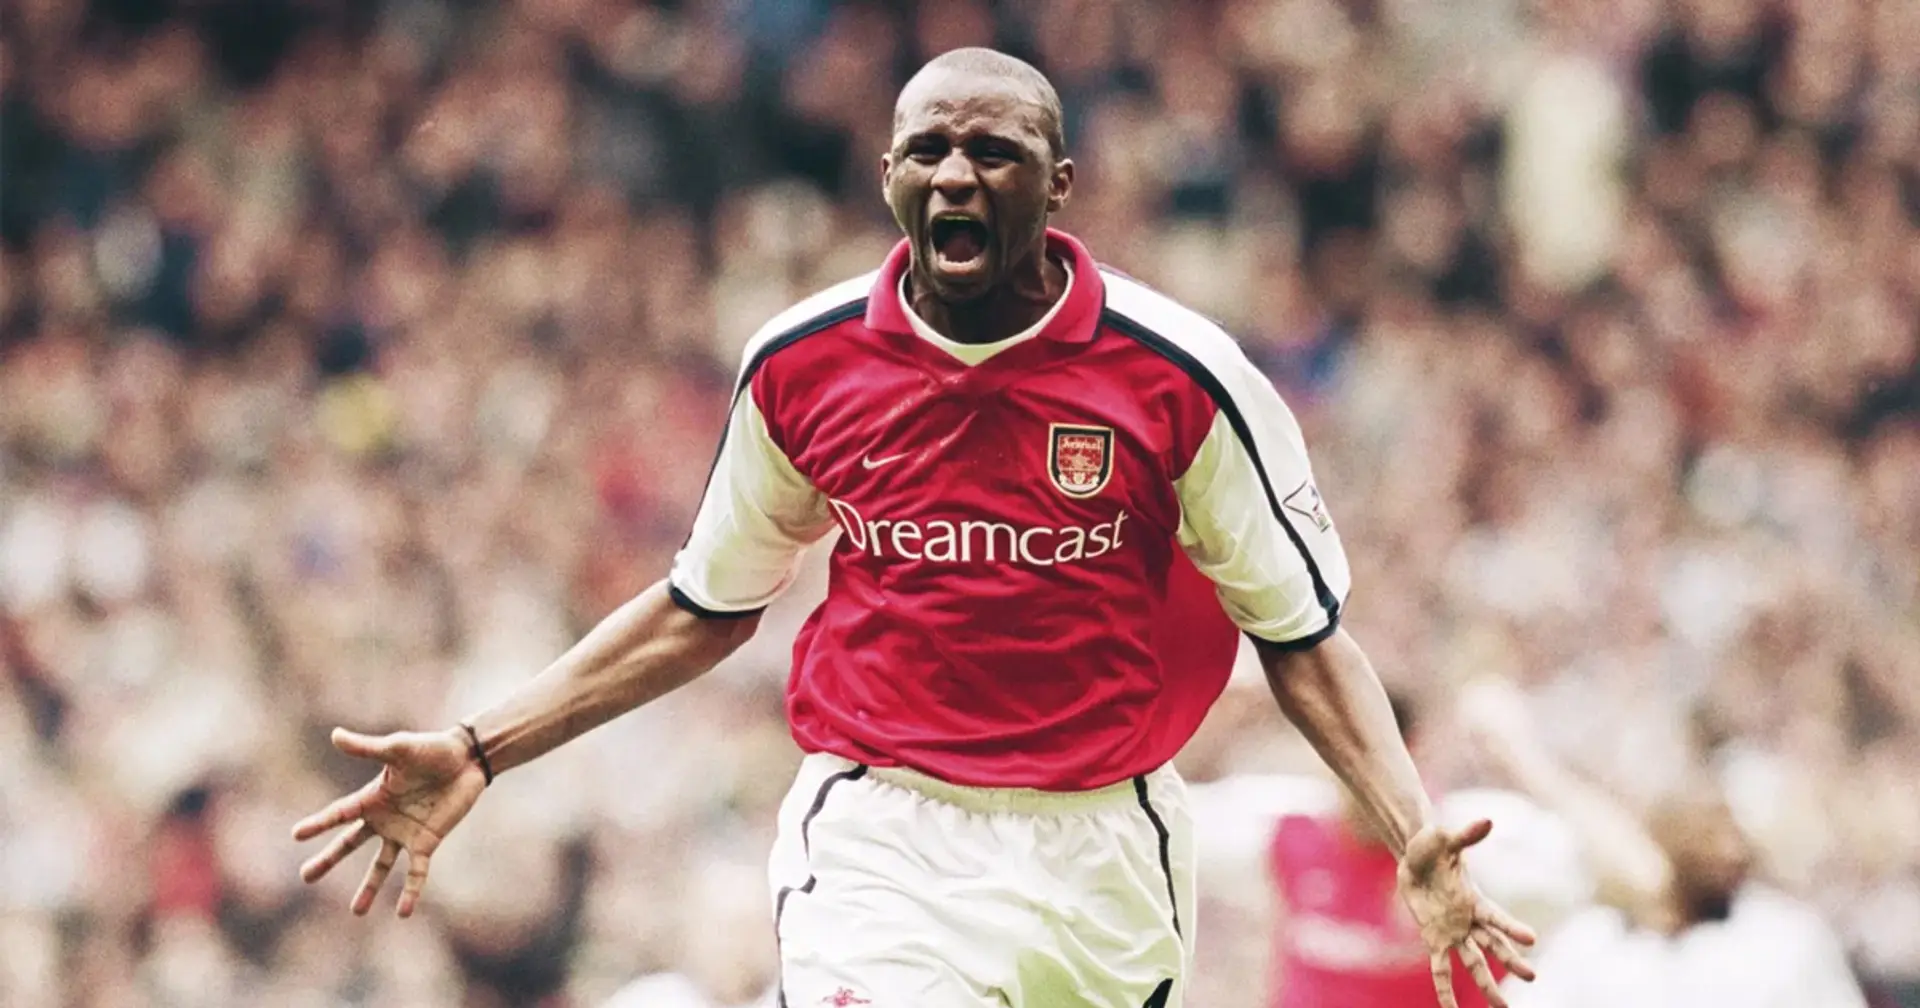 Former Invincible Patrick Vieira celebrates his Birthday today! What do you miss most about him?